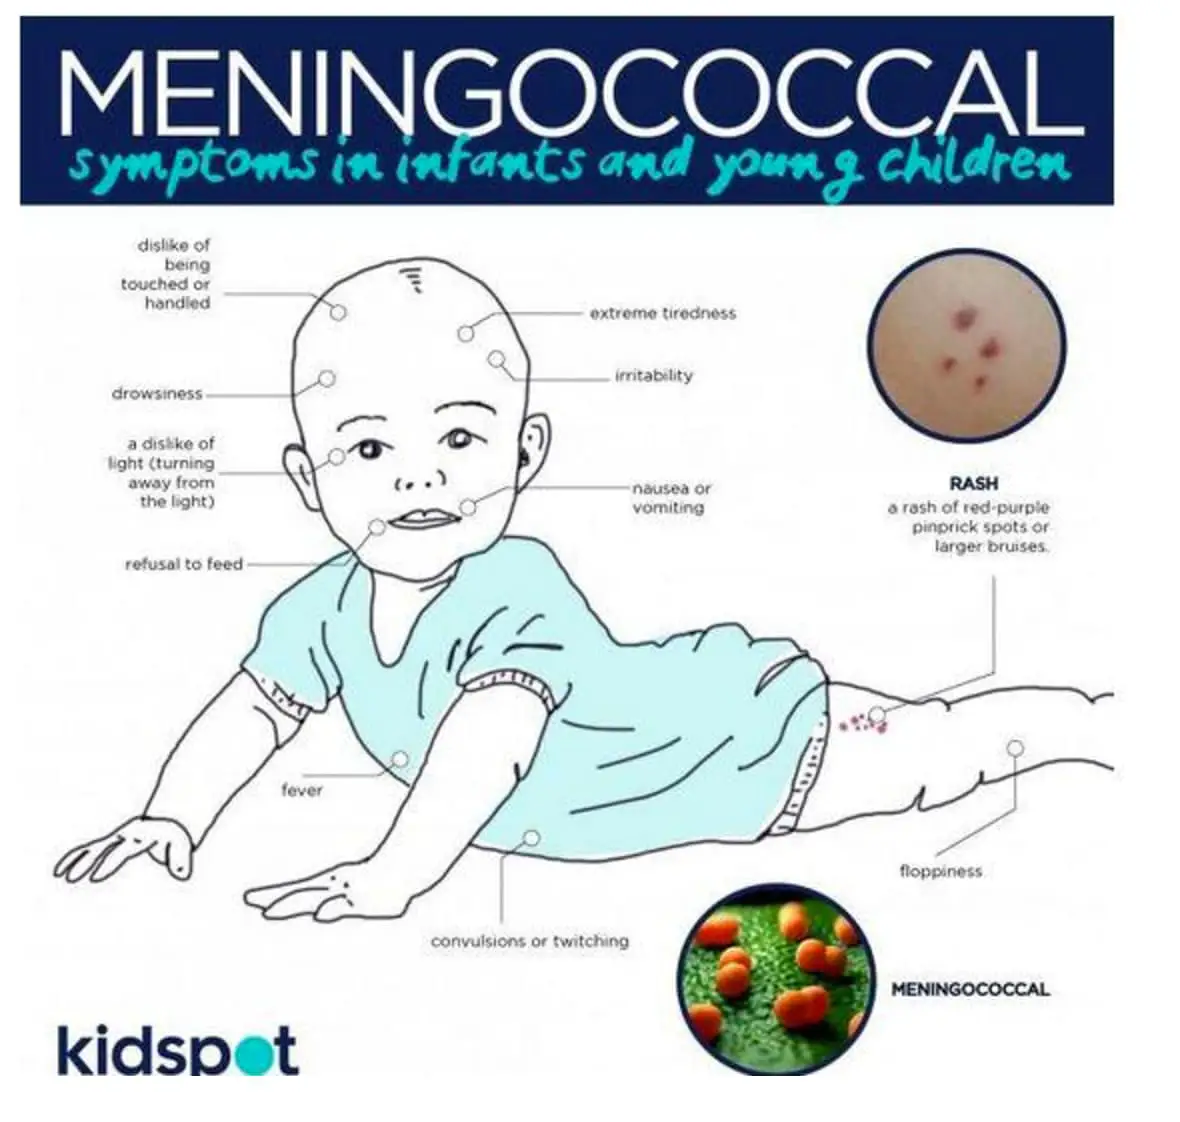 10 meningococcal facts that could save your kids life